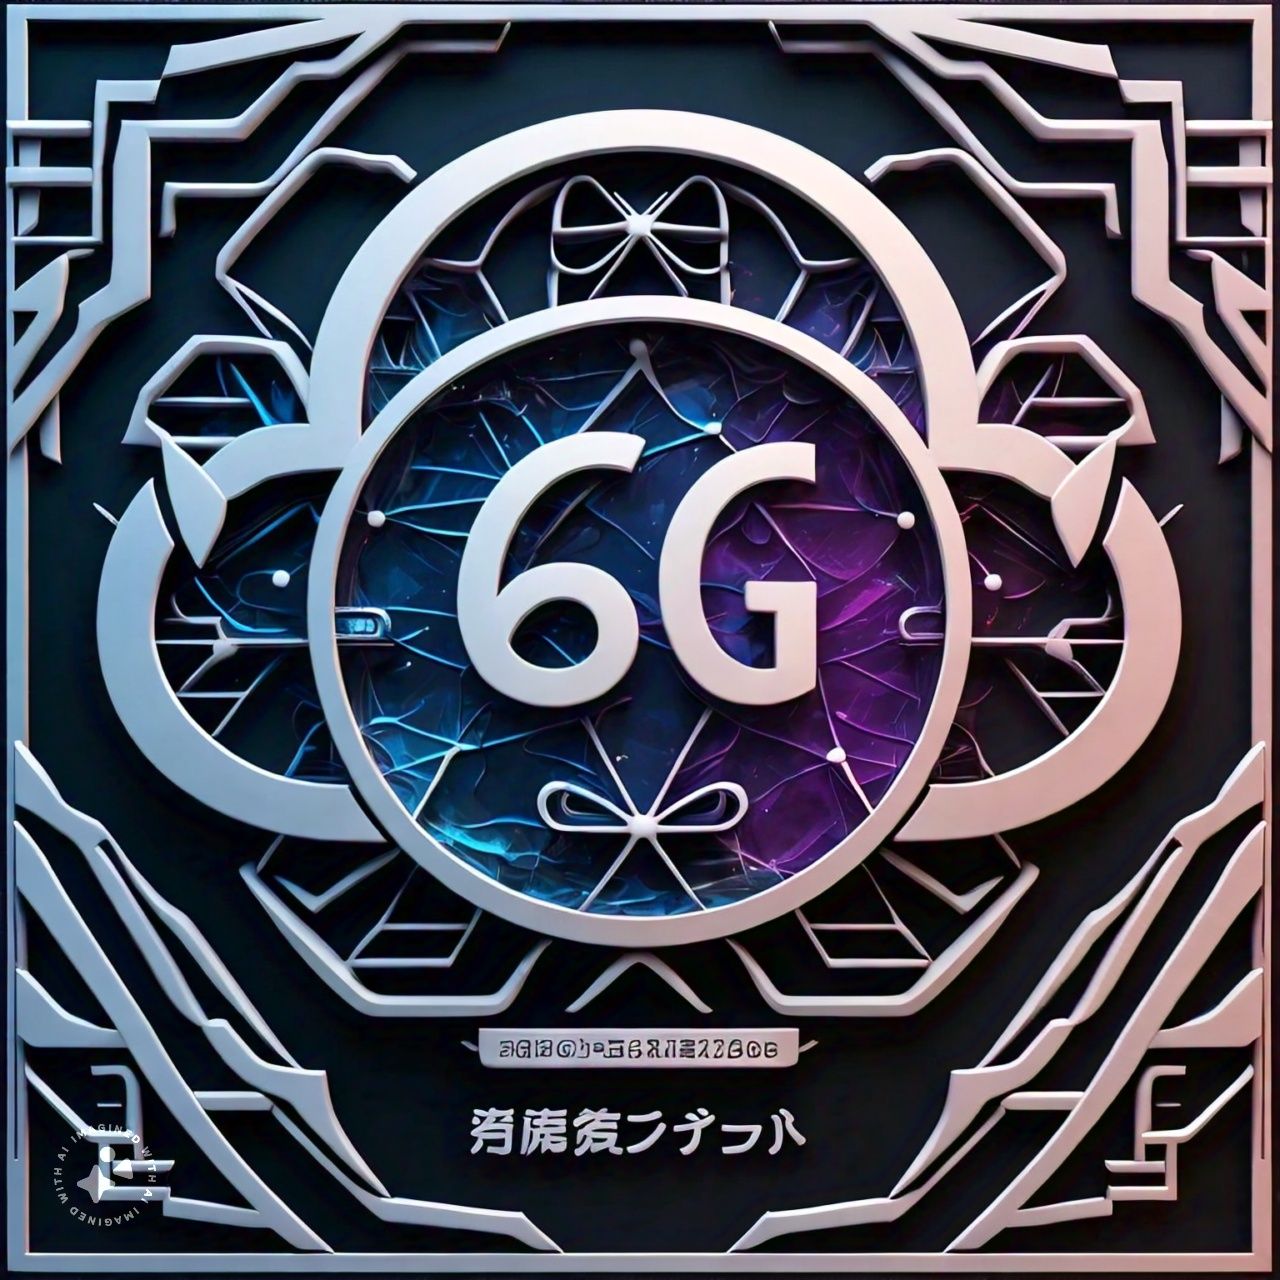 “6G Technology in Japan: Speed, Security, and Beyond”